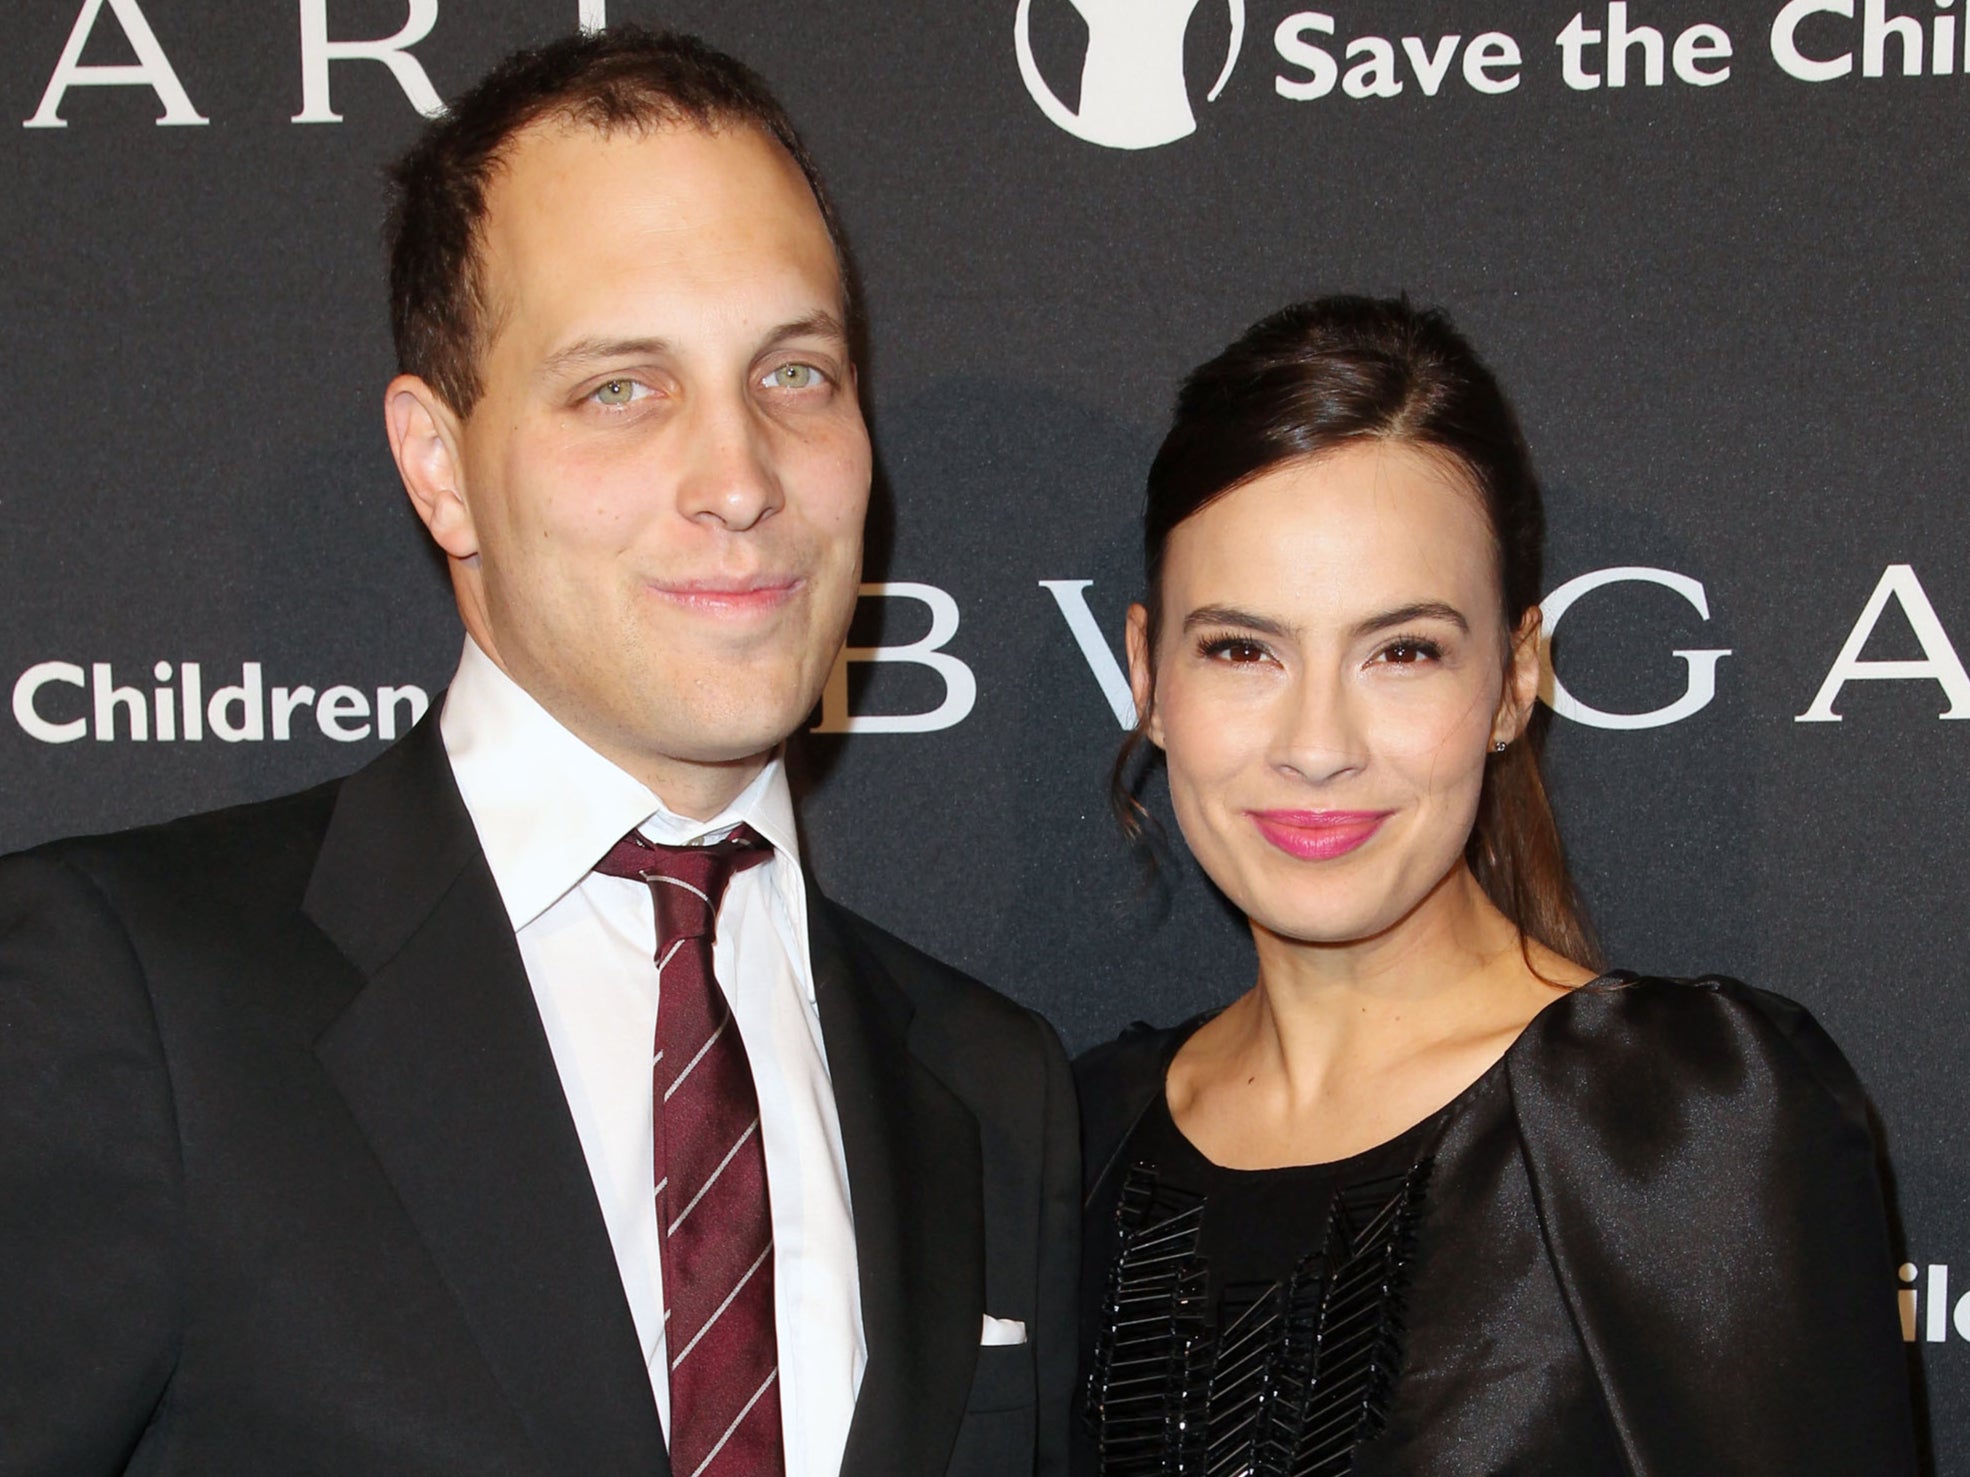 Lord Frederick Windsor and actress Sophie Winkleman attends BVLGARI and Save the children STOP. THINK. GIVE. Pre-Oscar Event at Spago on February 17, 2015 in Beverly Hills, California. (Photo by David Buchan/Getty Images)